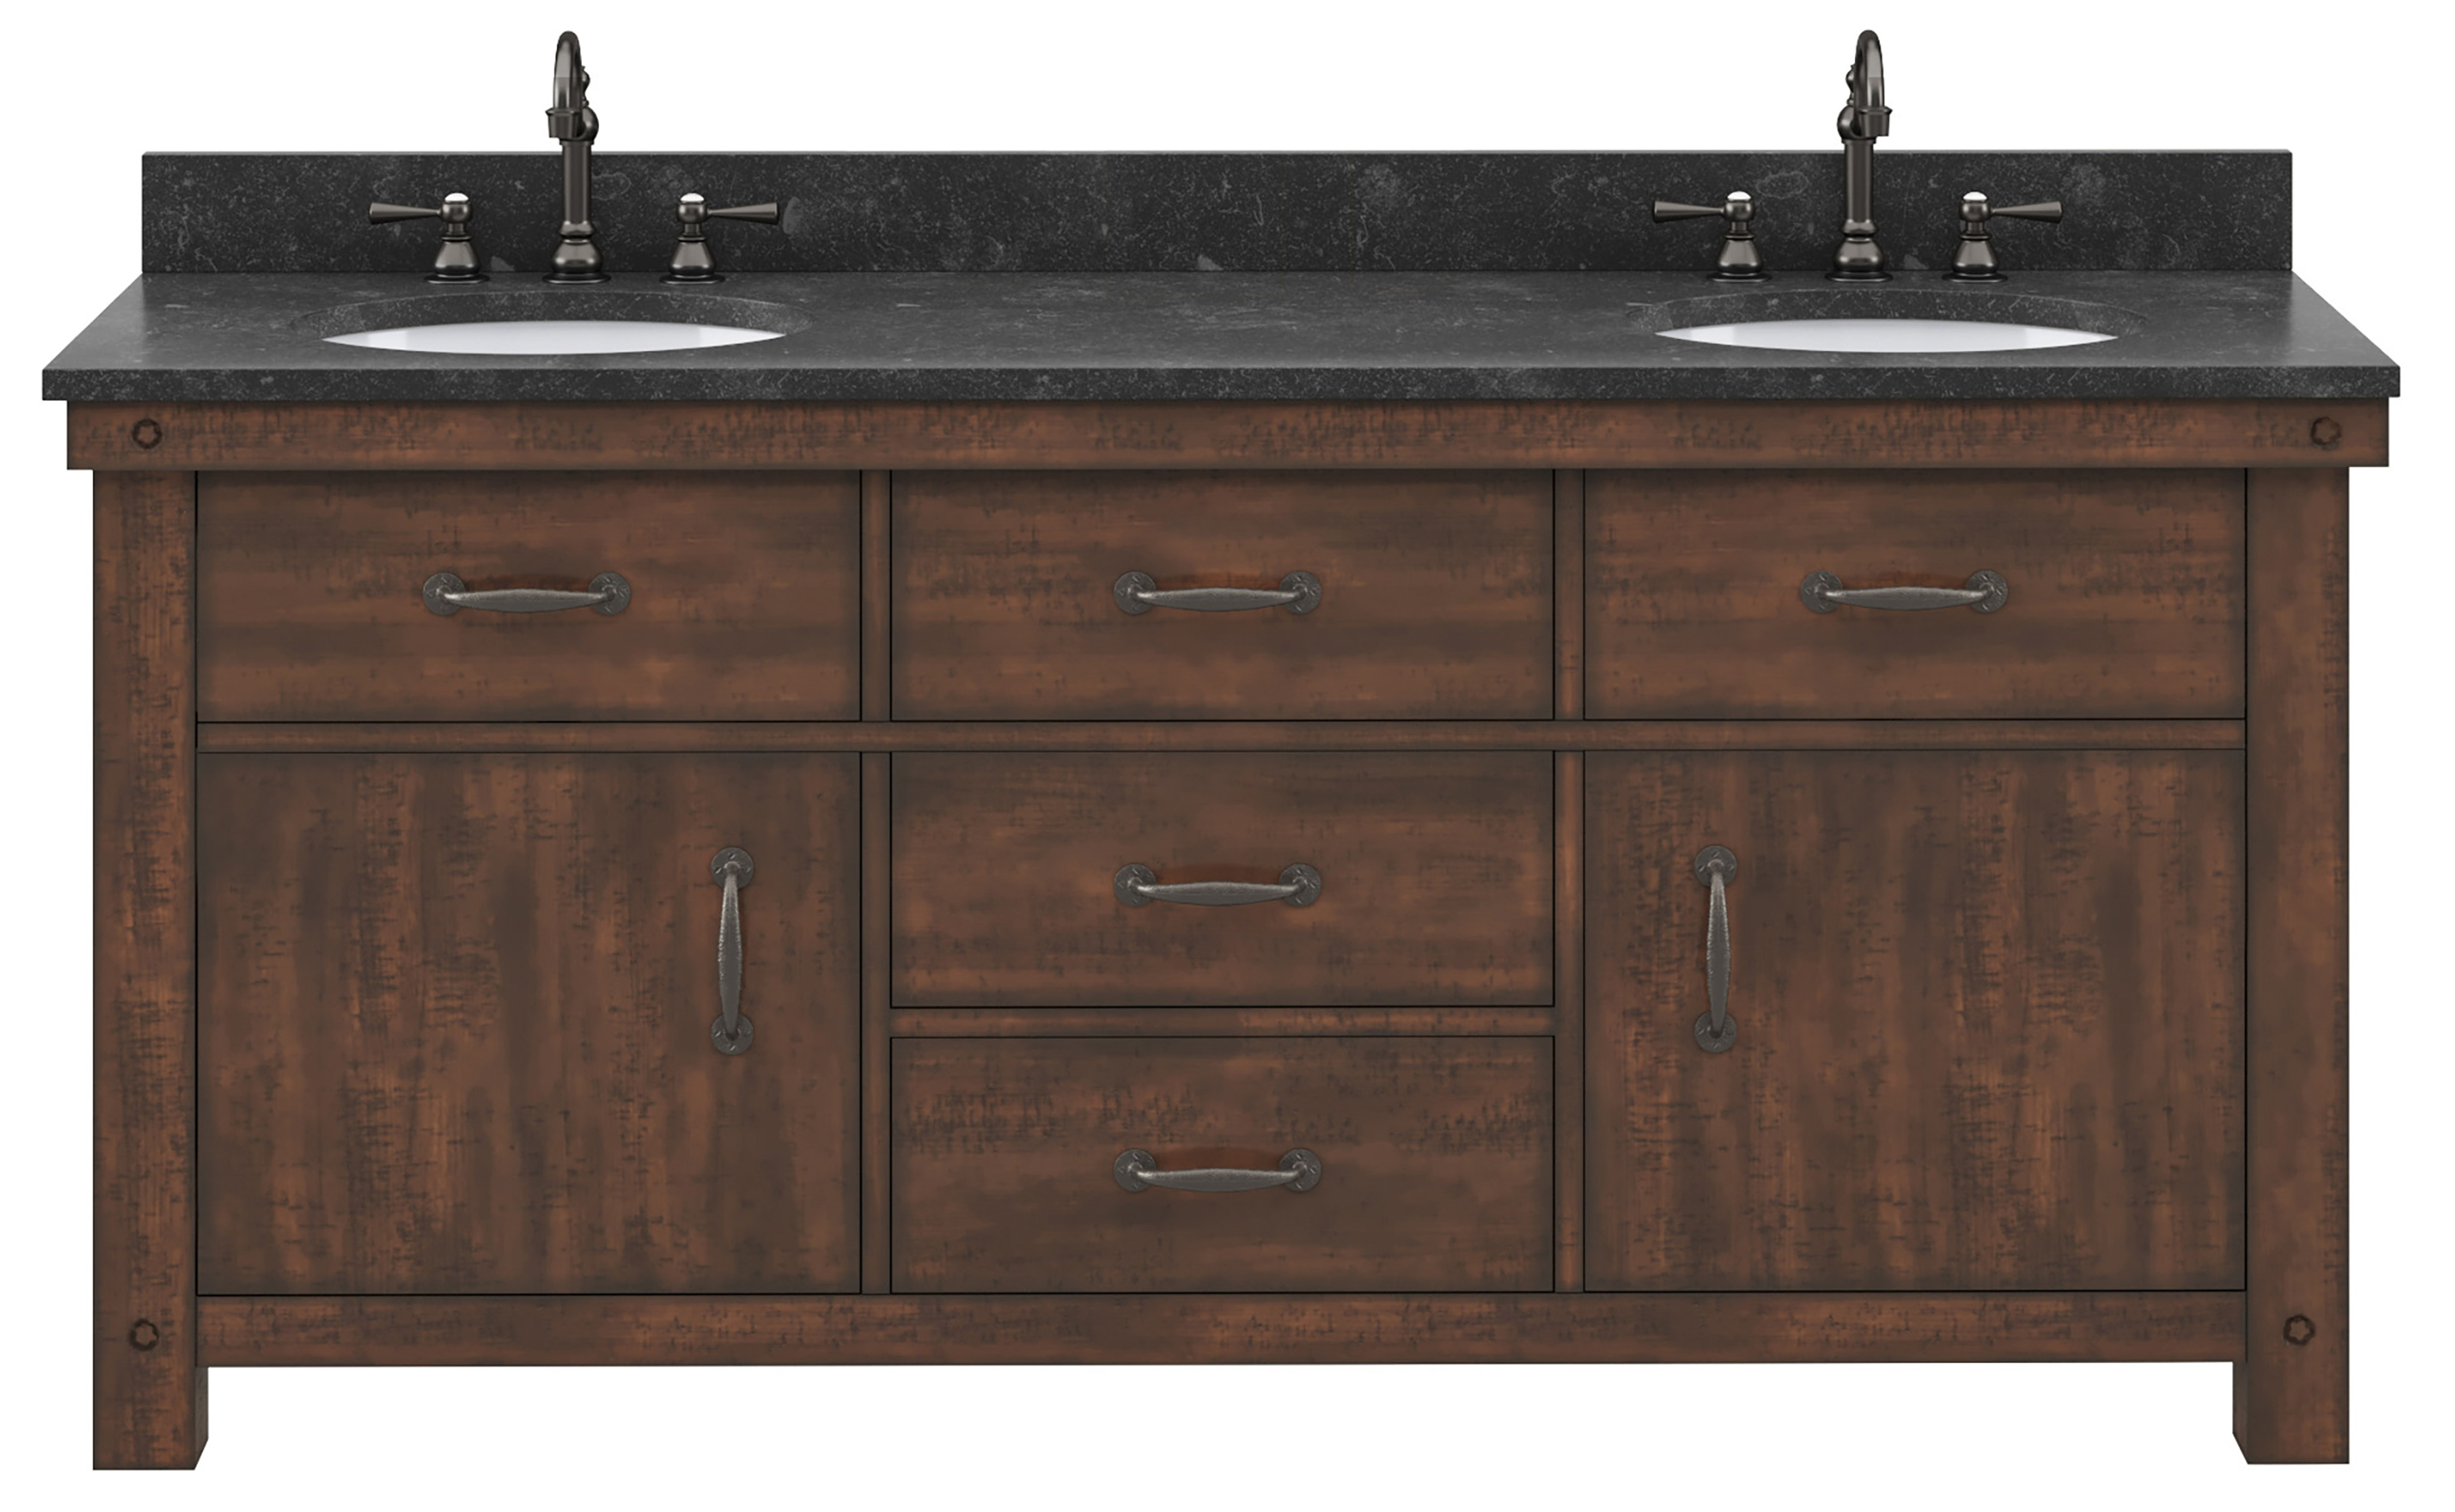 72" Double Sink Blue Limestone Countertop Vanity in Rustic Sierra with Mirror and Faucet Options